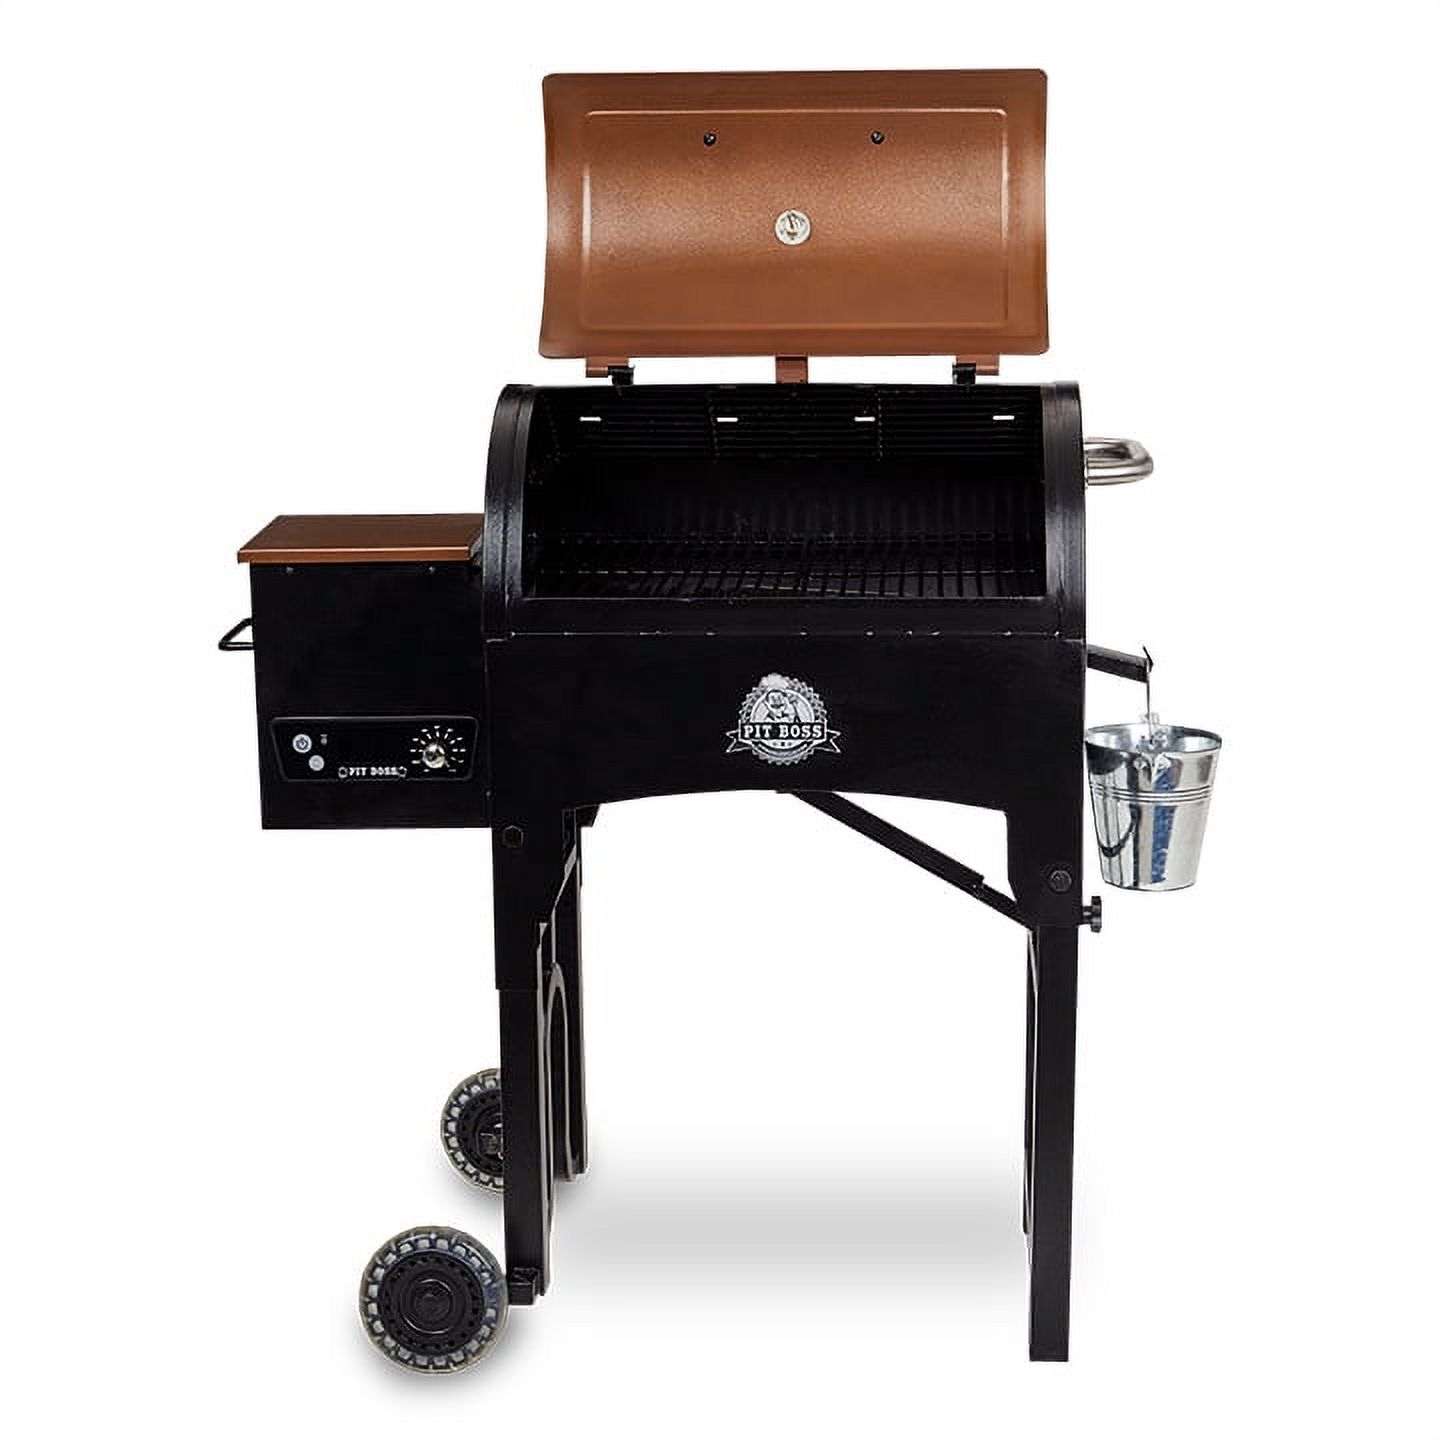 Pit Boss 340 Sq. in. Portable Tailgate, Camp Pellet Grill with Folding Legs - image 4 of 10